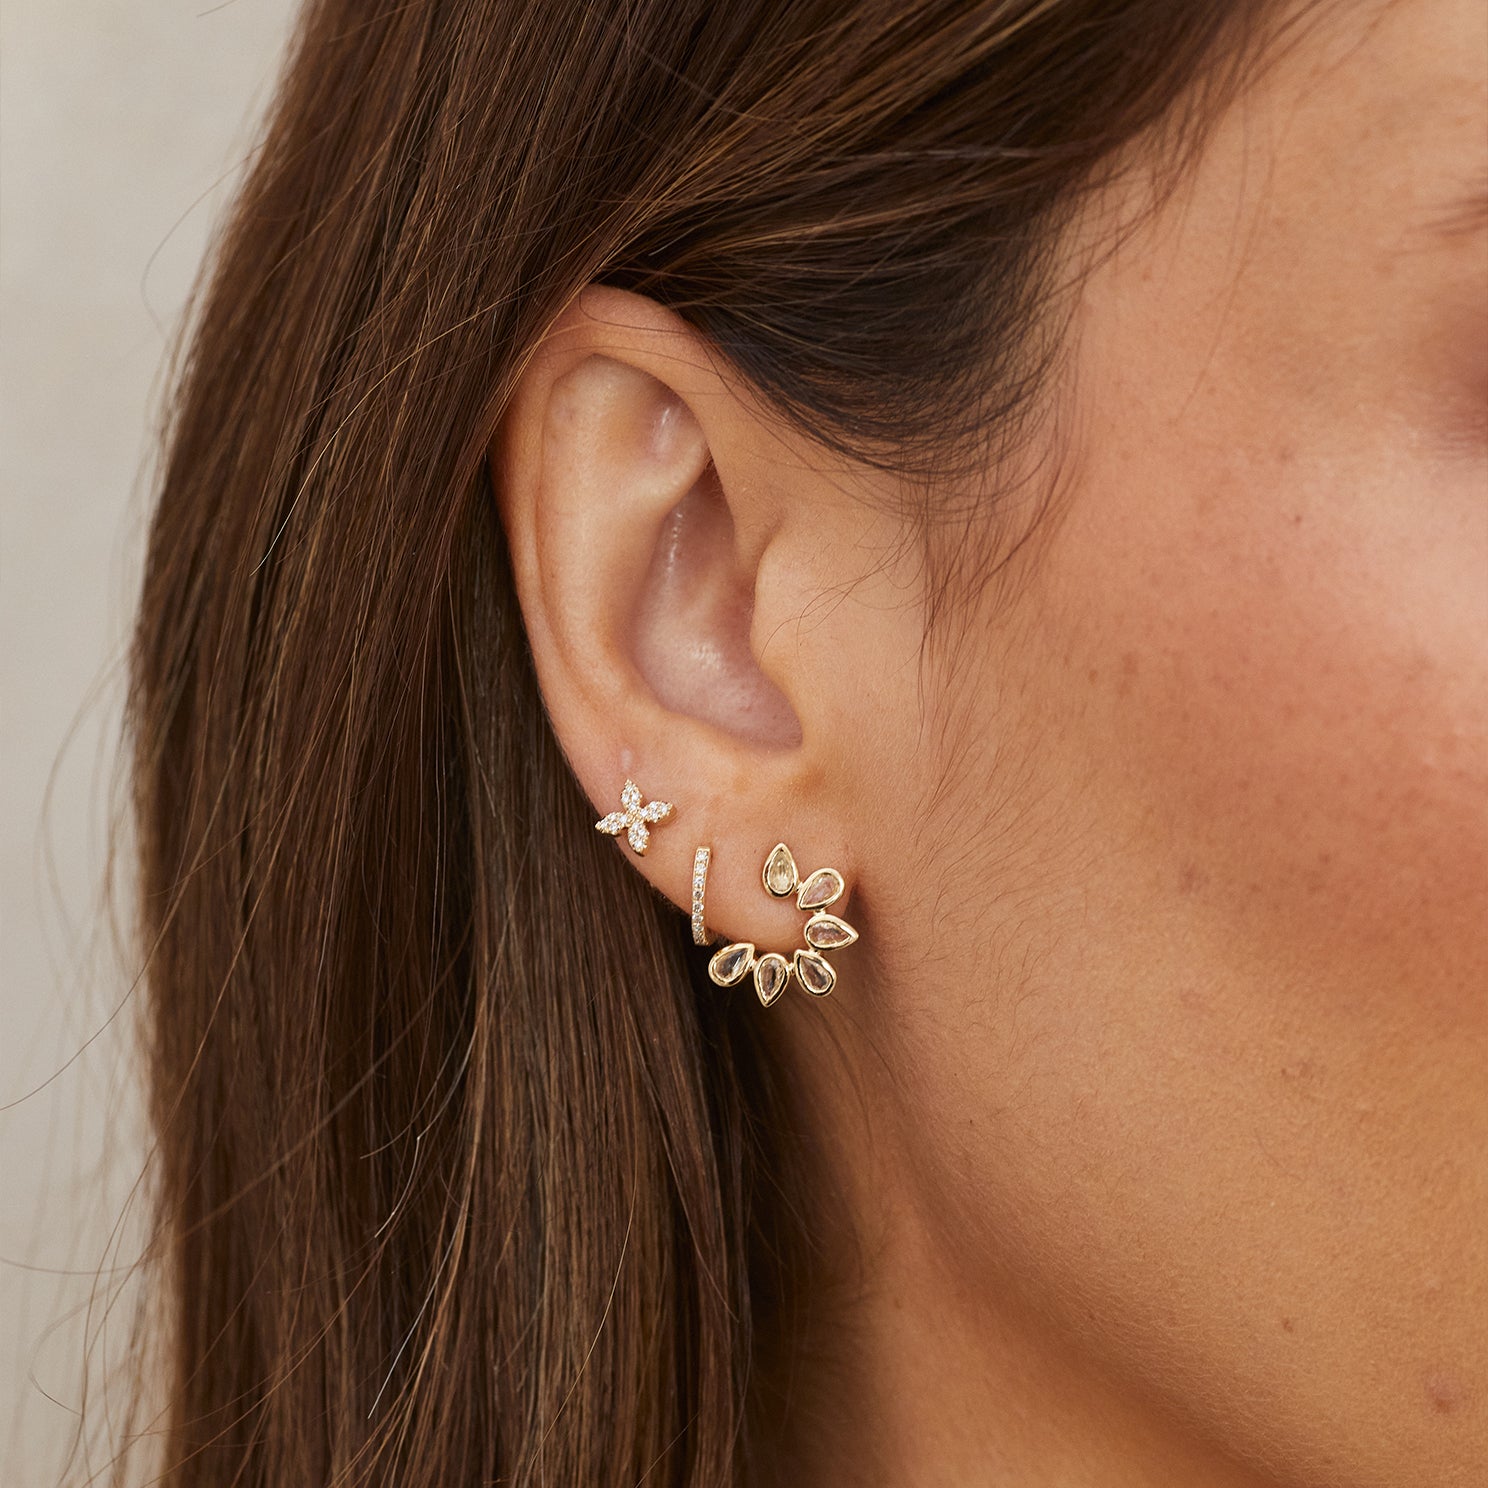 Diamond Blossom Stud Earring in 14k yellow gold styled on ear of model next to huggie and white quartz earring